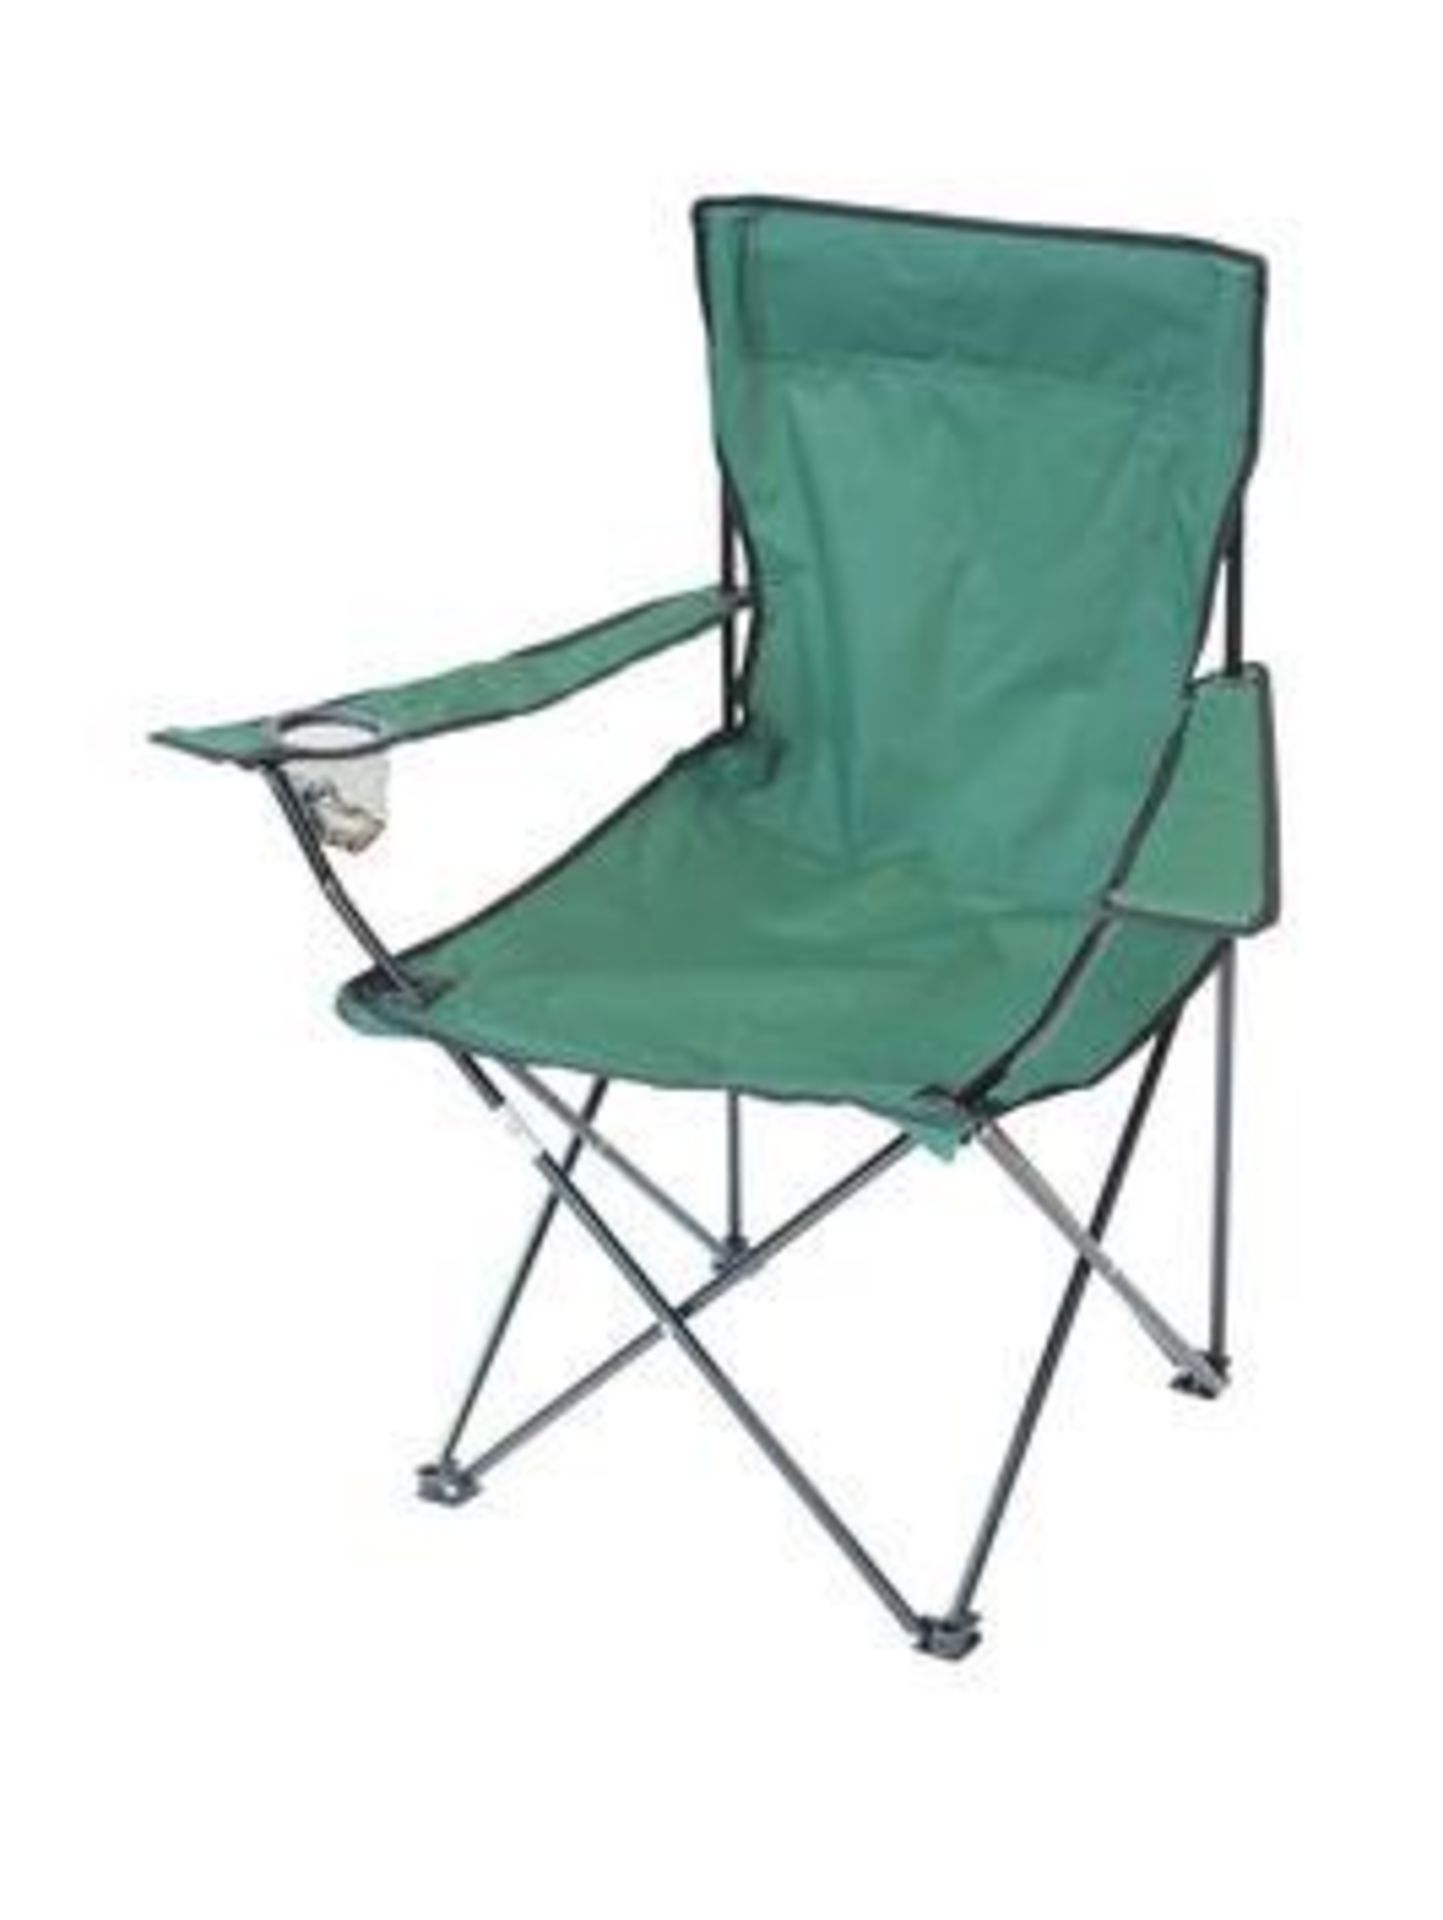 1 x Yellowstone Camping Chair - No Assembly Required - Compact, With Steel Frame - Brand New In